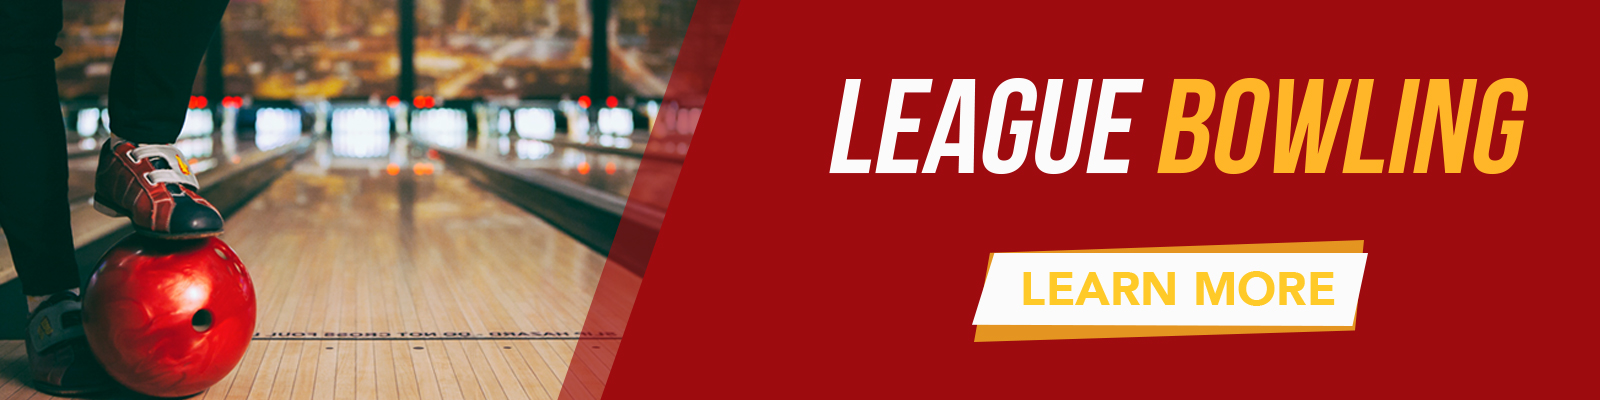 Click to learn more about league bowling